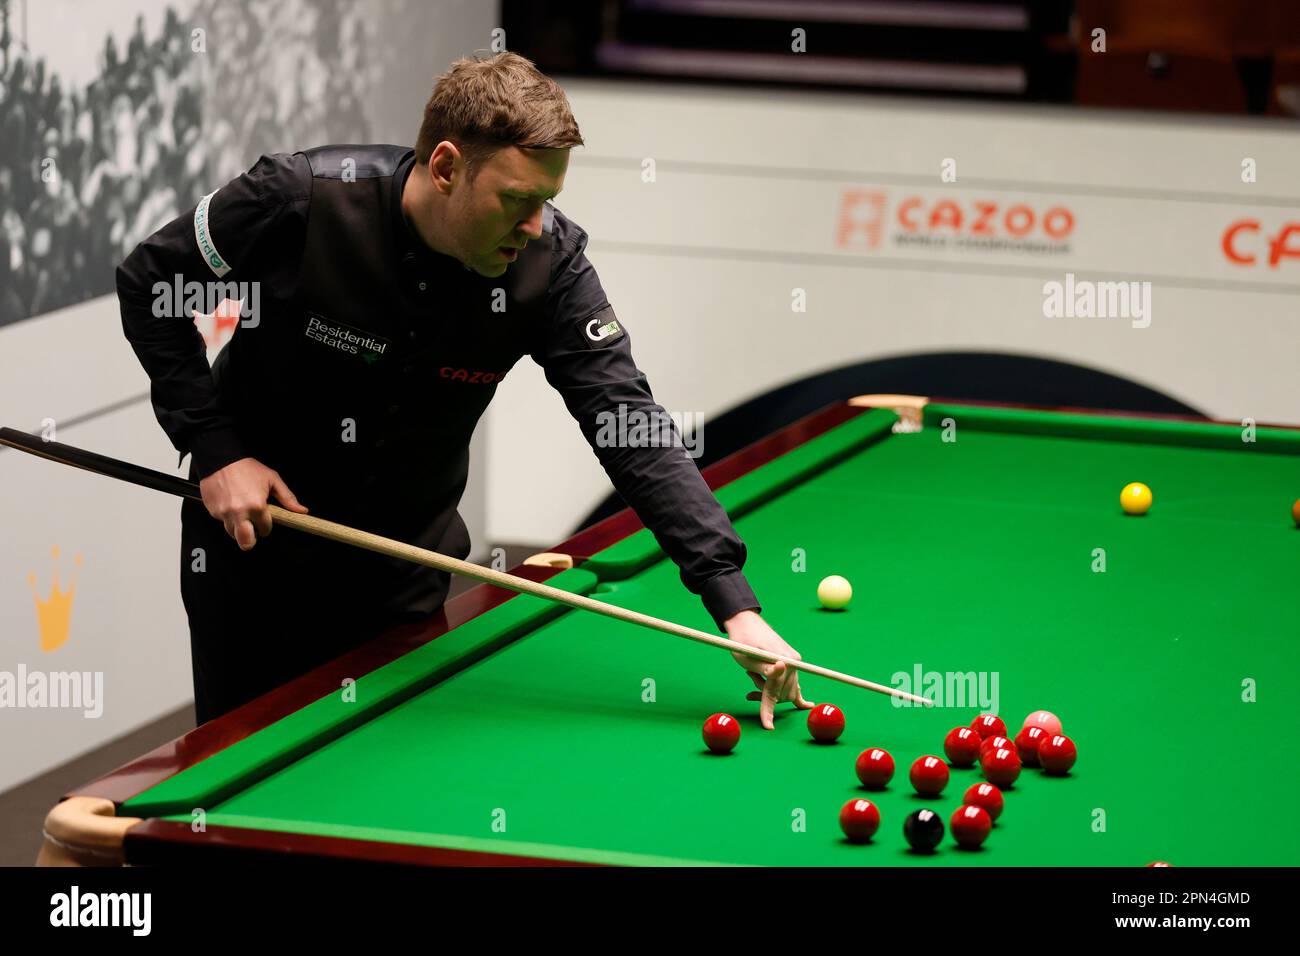 Ricky Walden during day two of the Cazoo World Snooker Championship at the Crucible Theatre, Sheffield